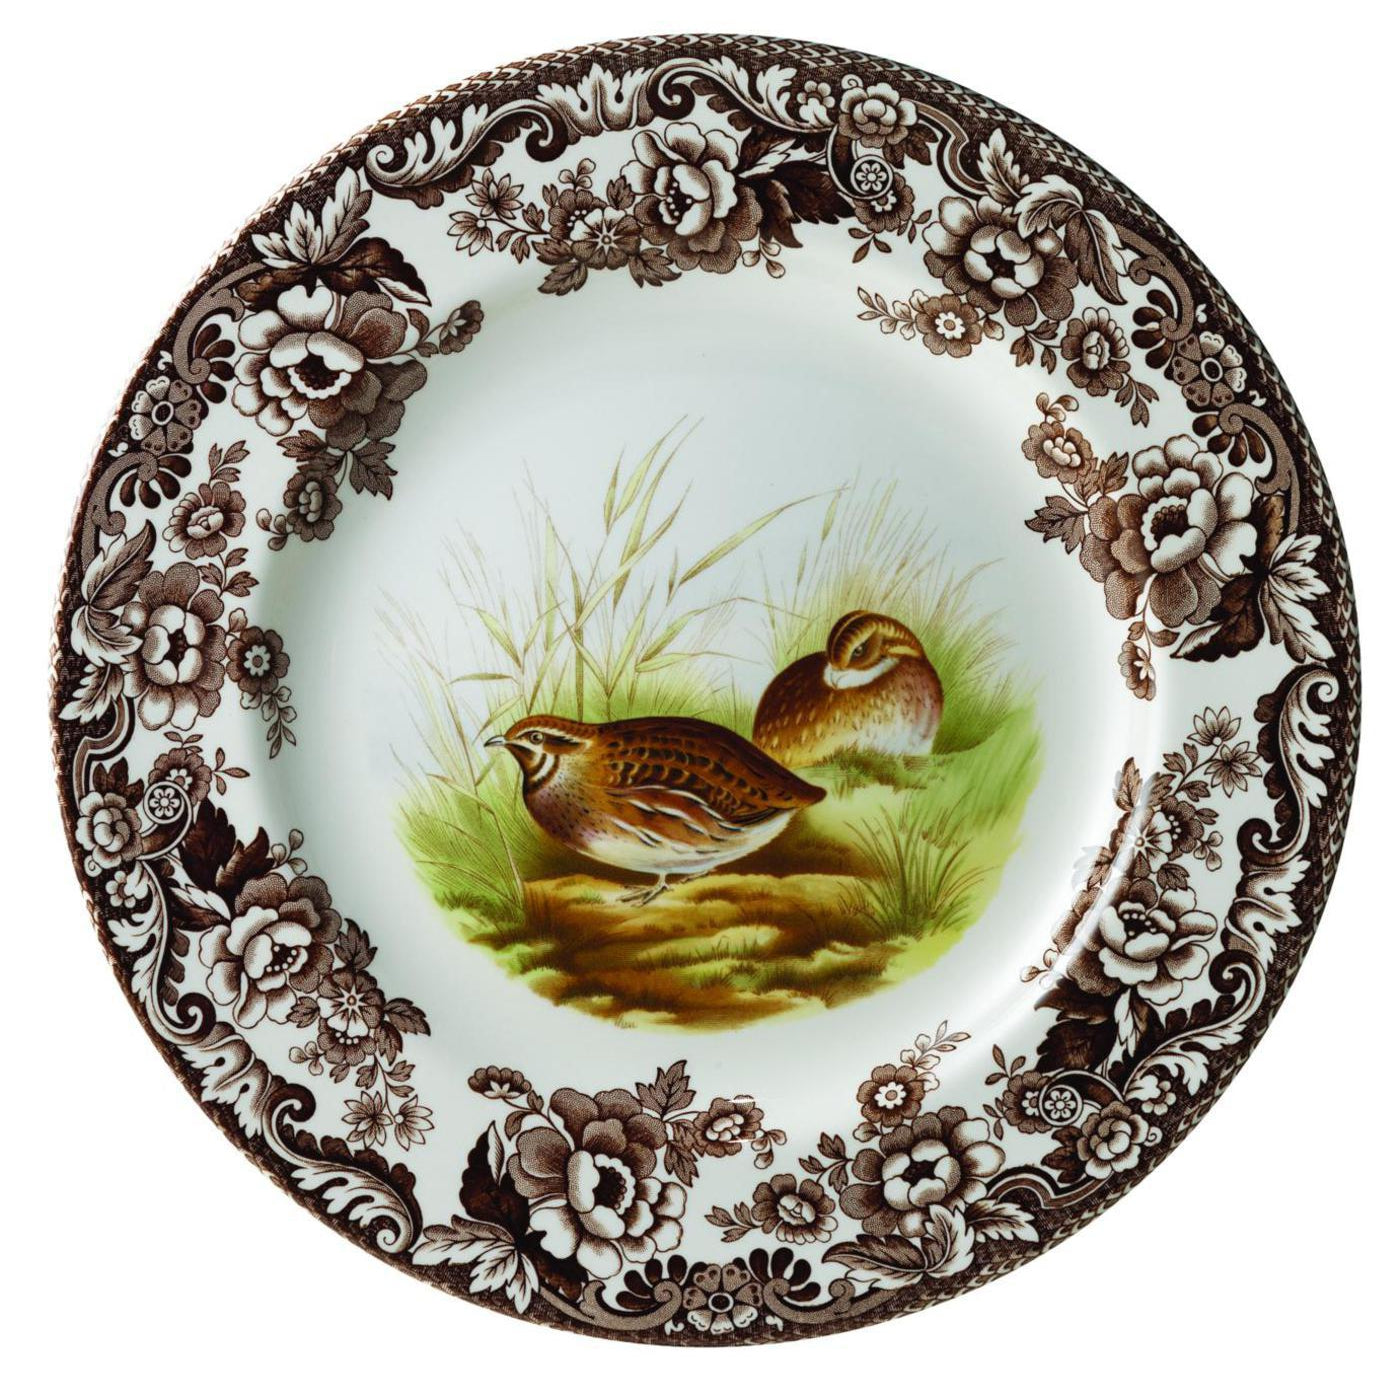 Spode Woodland Dinner Plate 10.5" - Individual-HOME/GIFTWARE-QUAIL-Kevin's Fine Outdoor Gear & Apparel